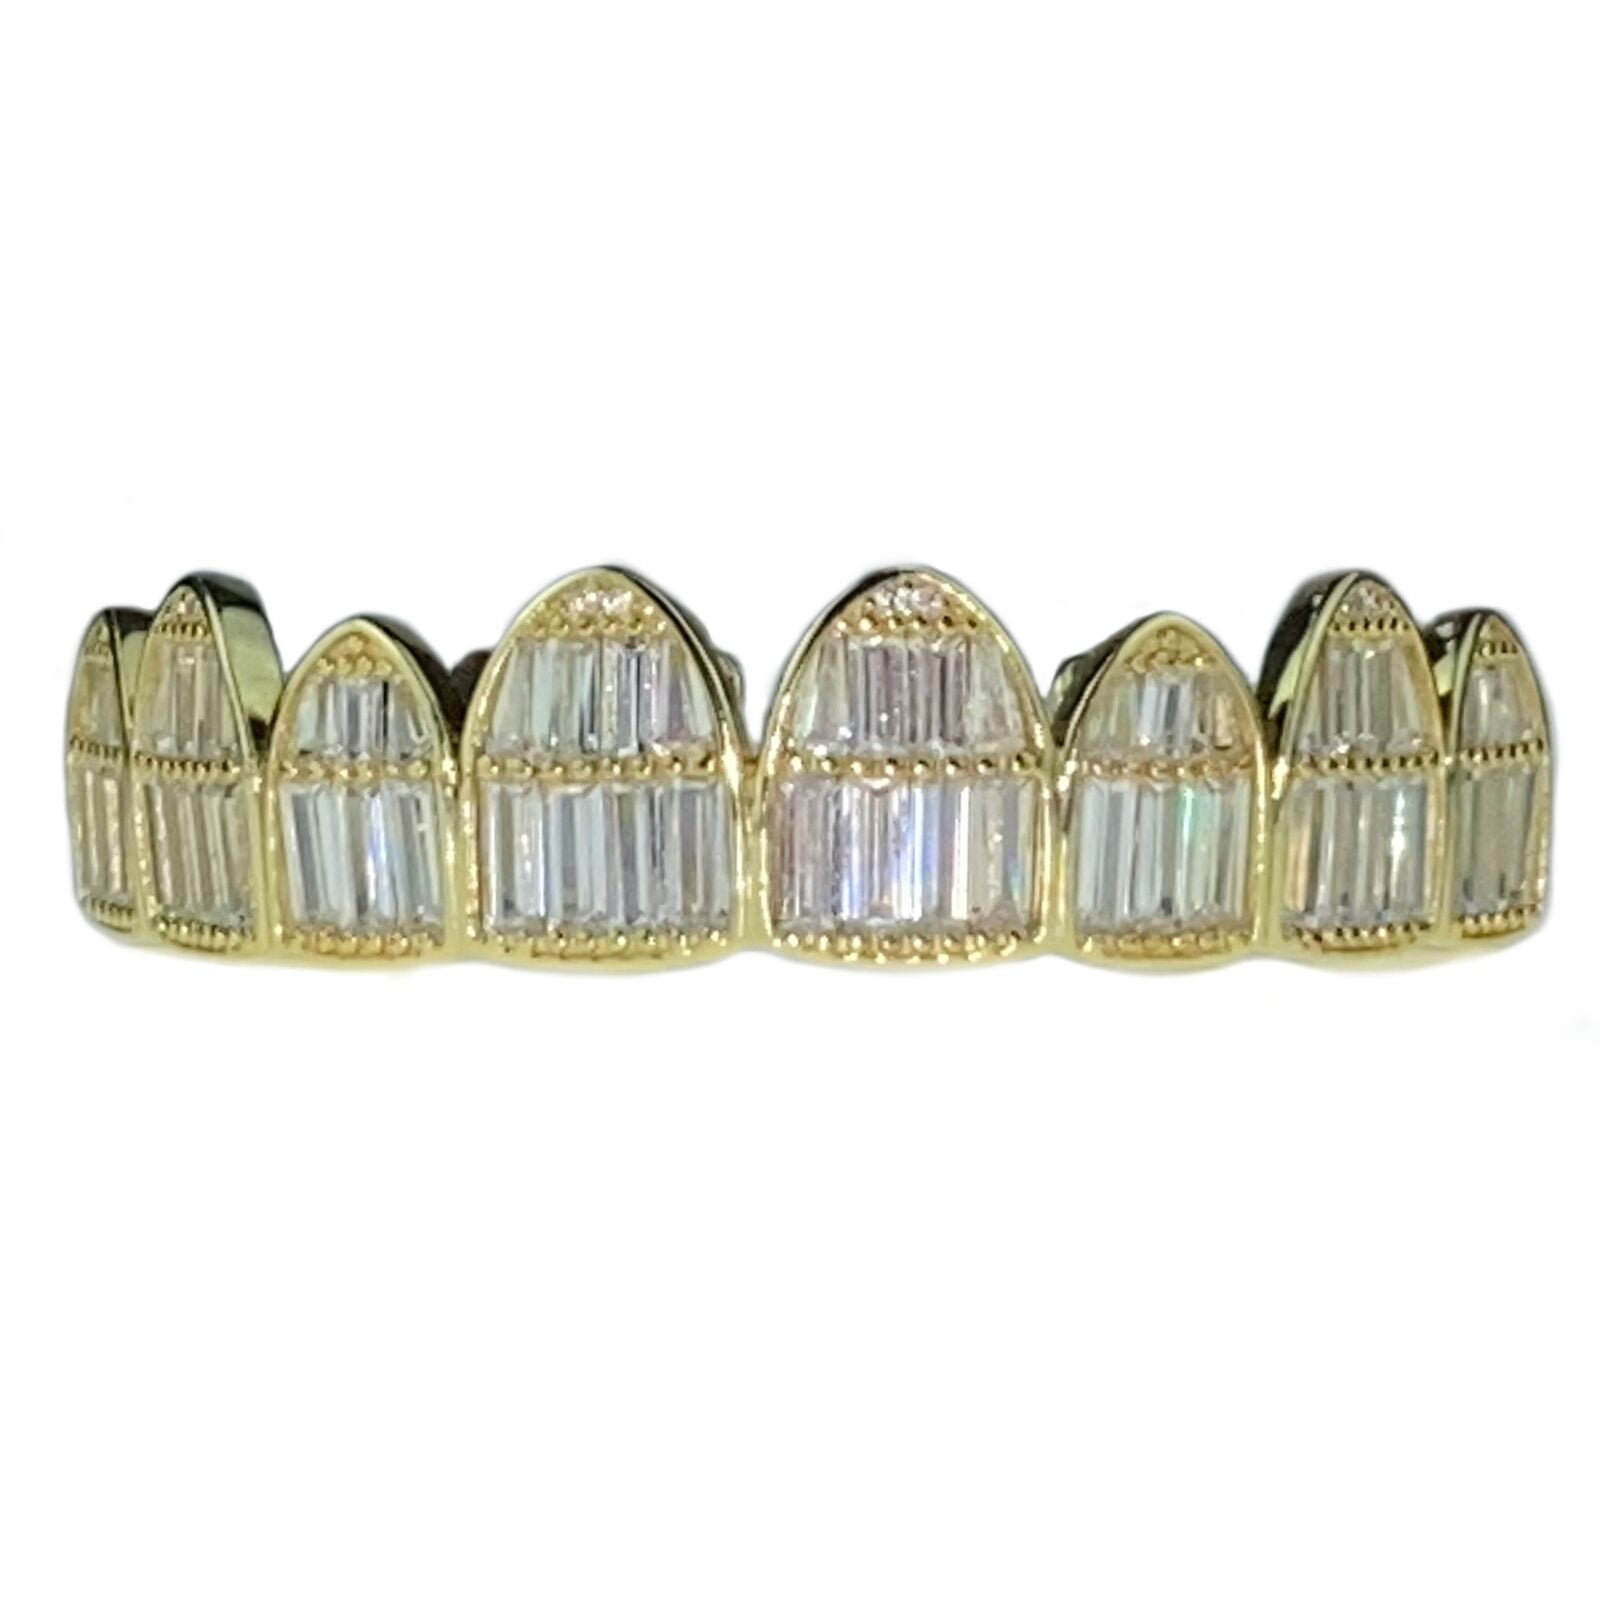 Real 925 Silver 14k Gold Finish ICED Baguette Diamond GRILLZ Teeth Fronts Grills 